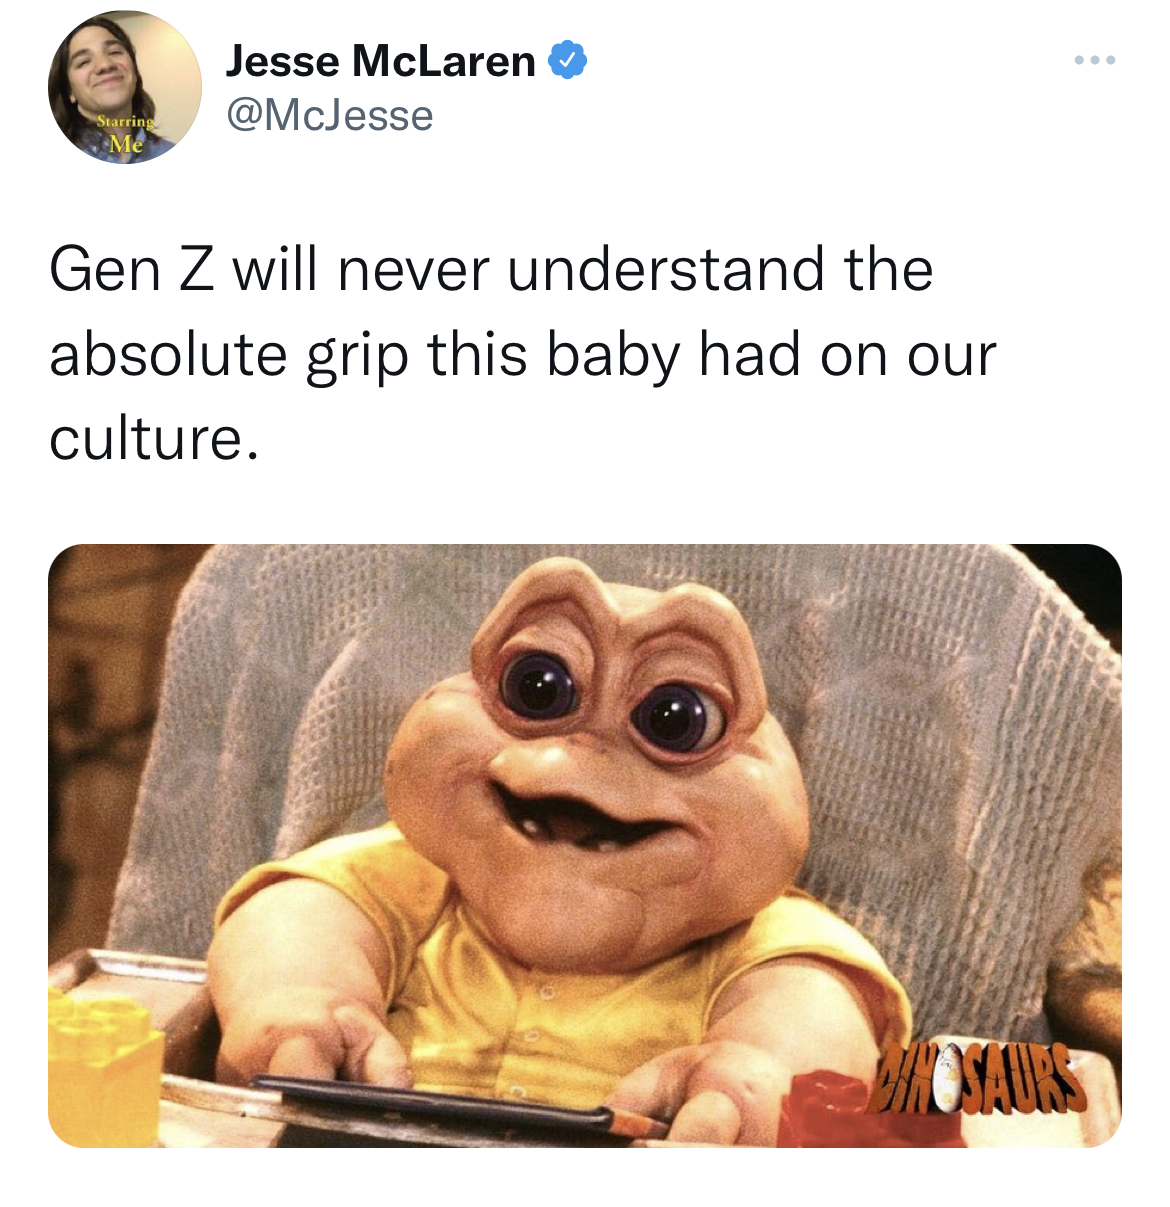 savage tweets to start the week - baby - Jesse McLaren Gen Z will never understand the absolute grip this baby had on our culture.